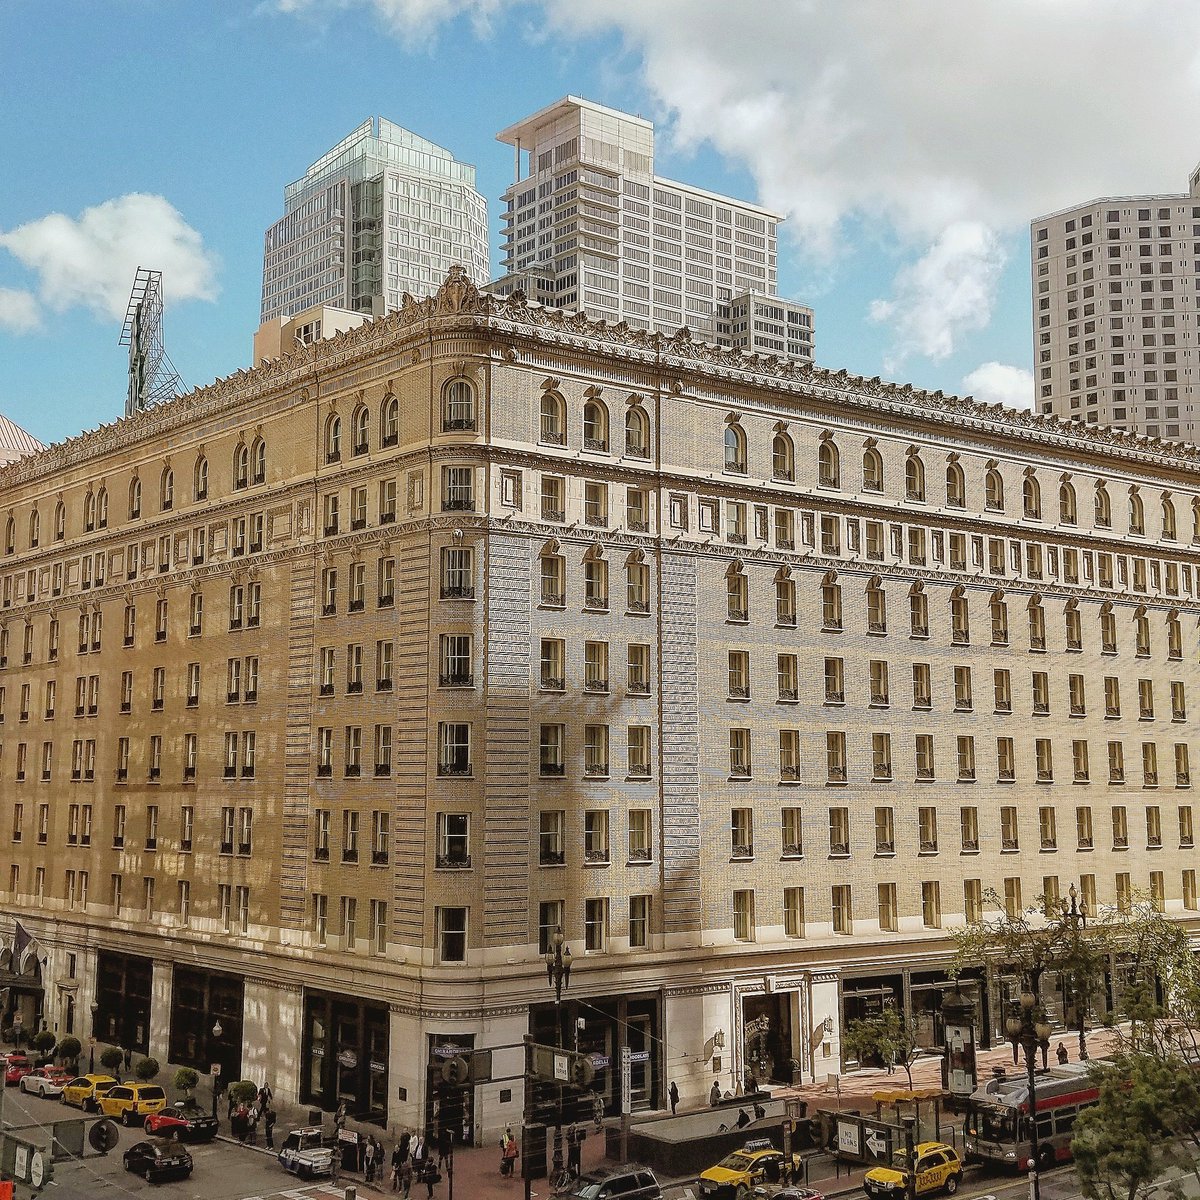 Palace Hotel lives and breathes history of San Francisco